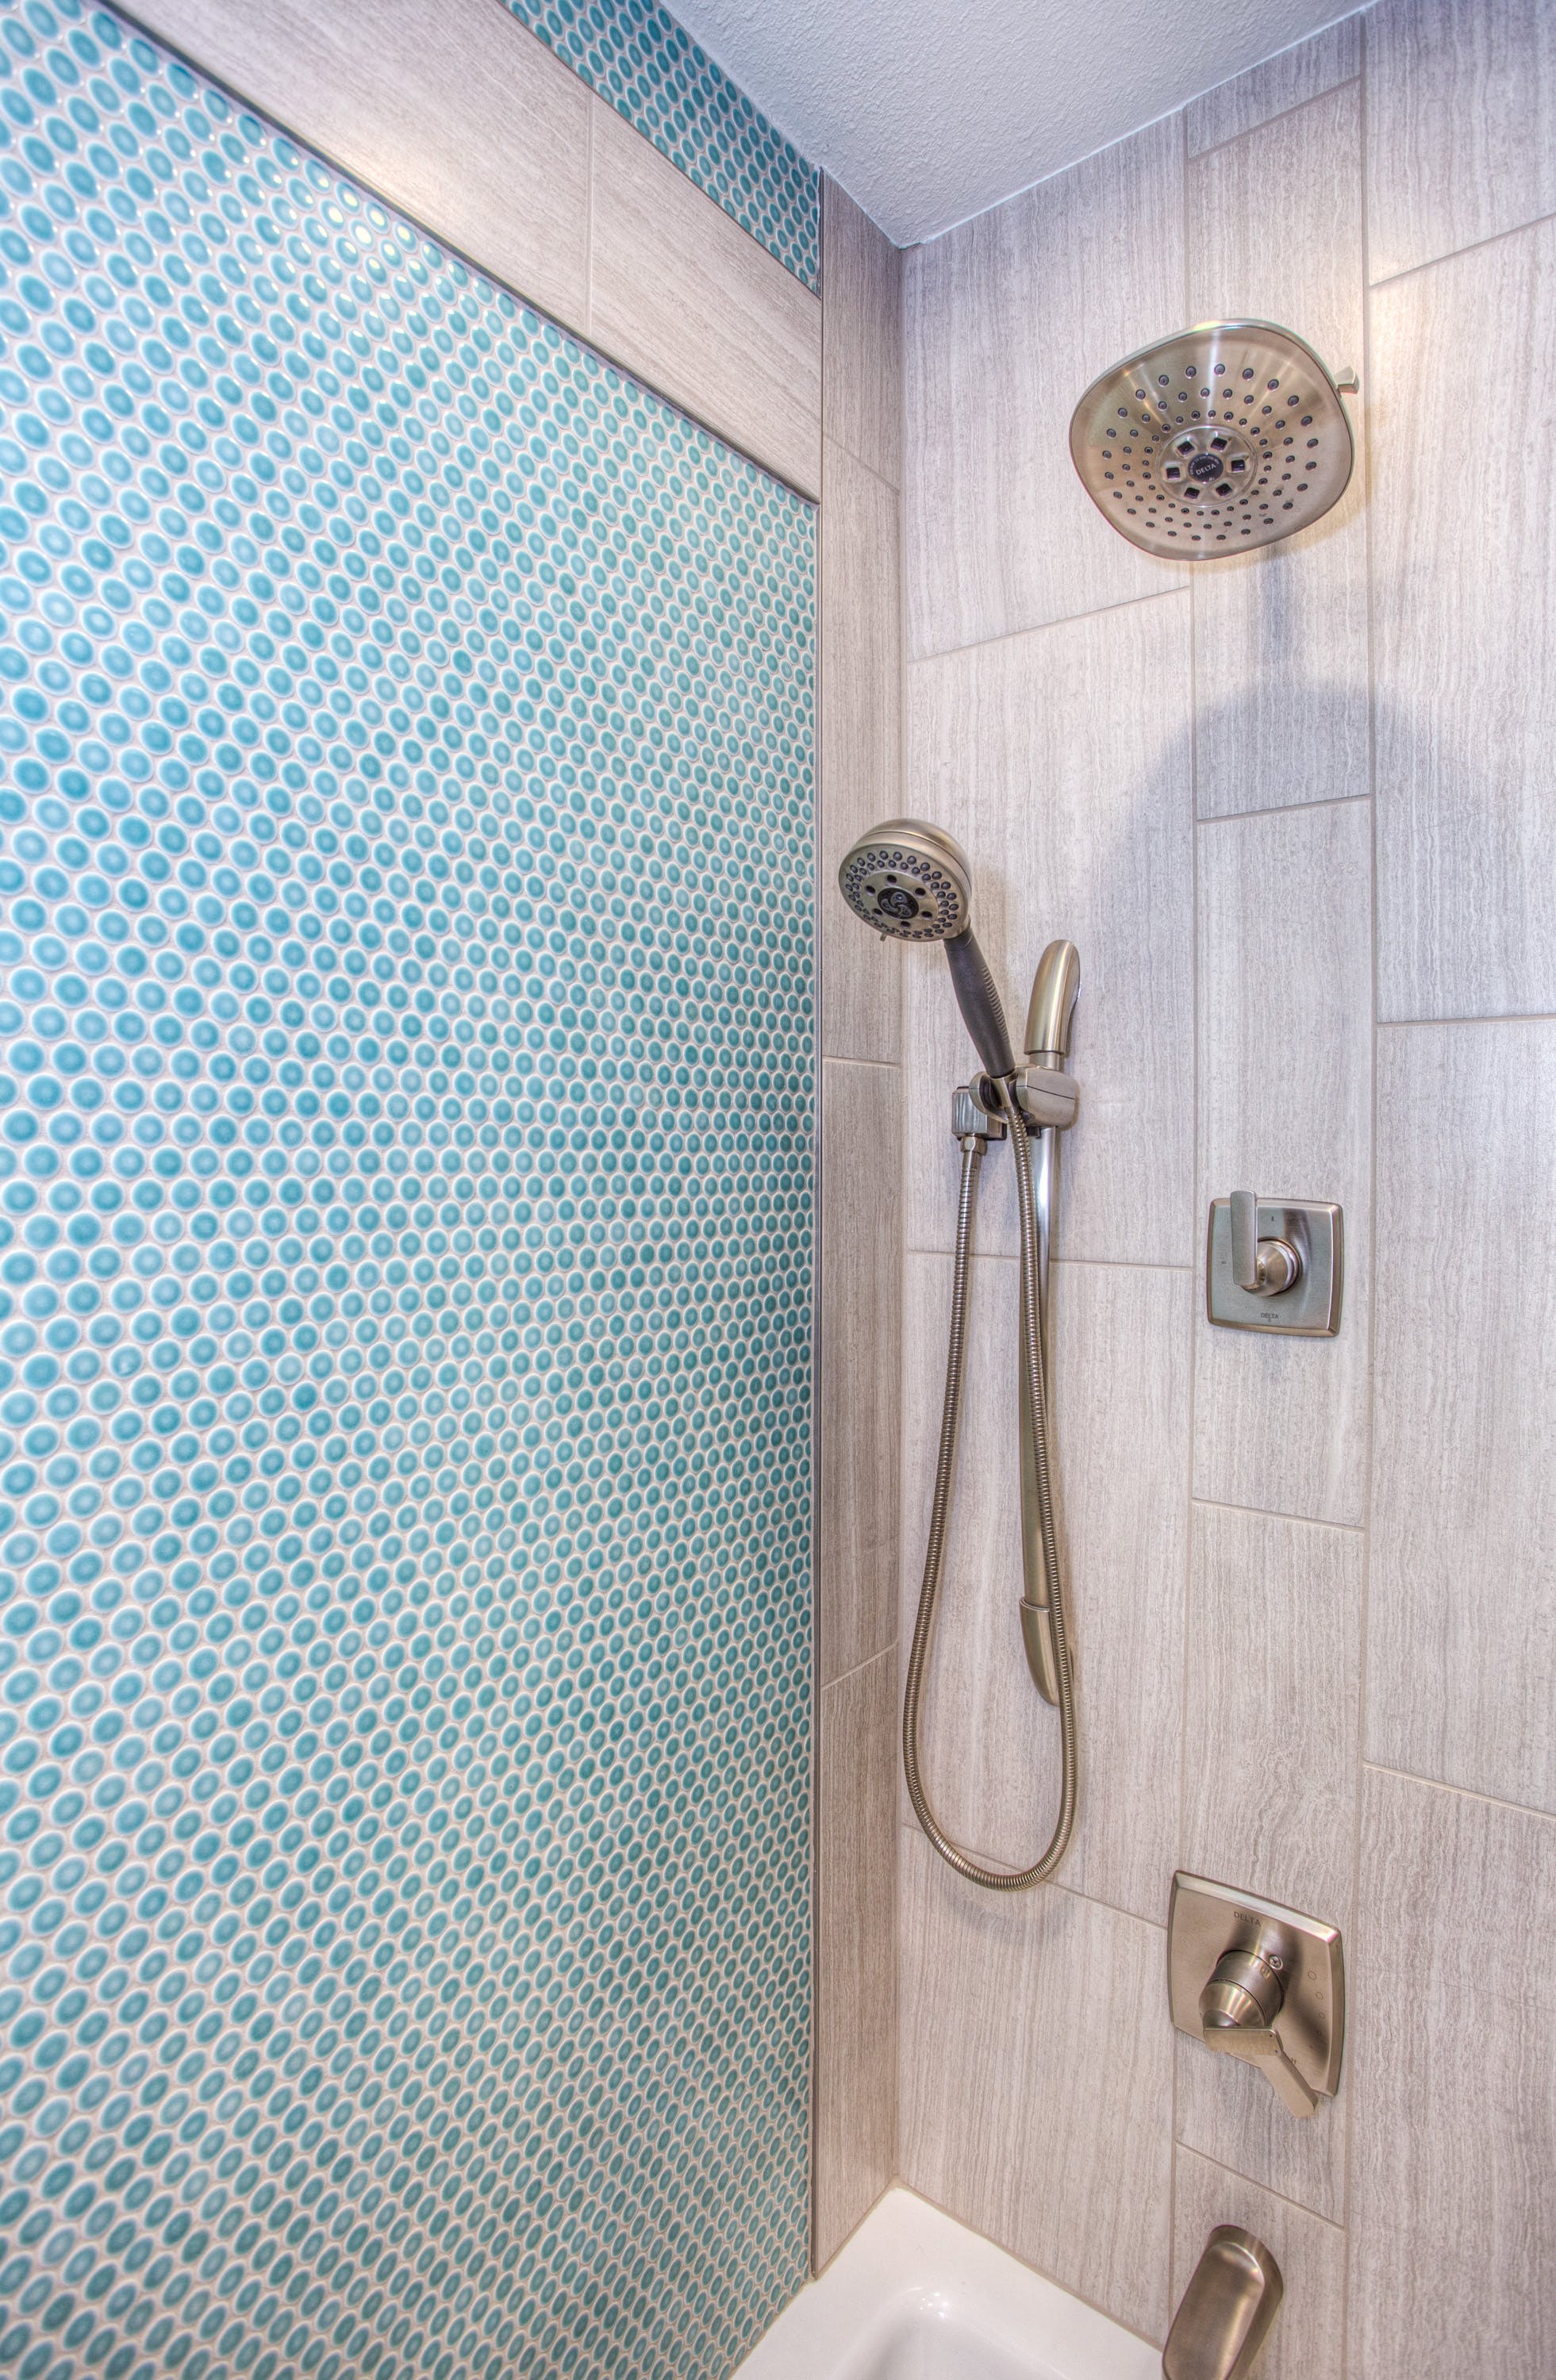 A shower in a bathroom | Source: Pexels